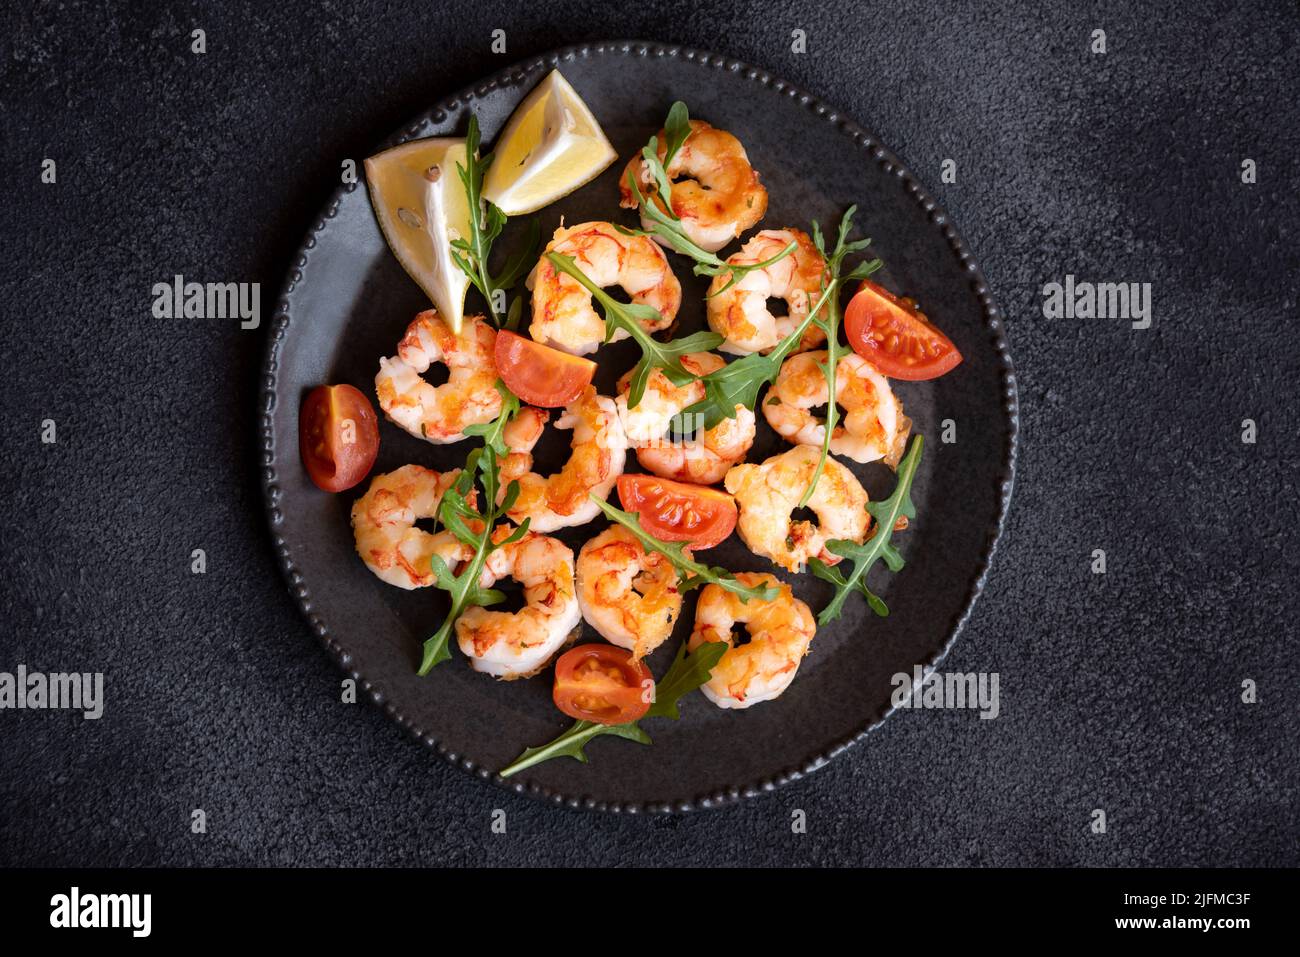 Roasted shrimps with tomatoes and arugola on black plate Stock Photo